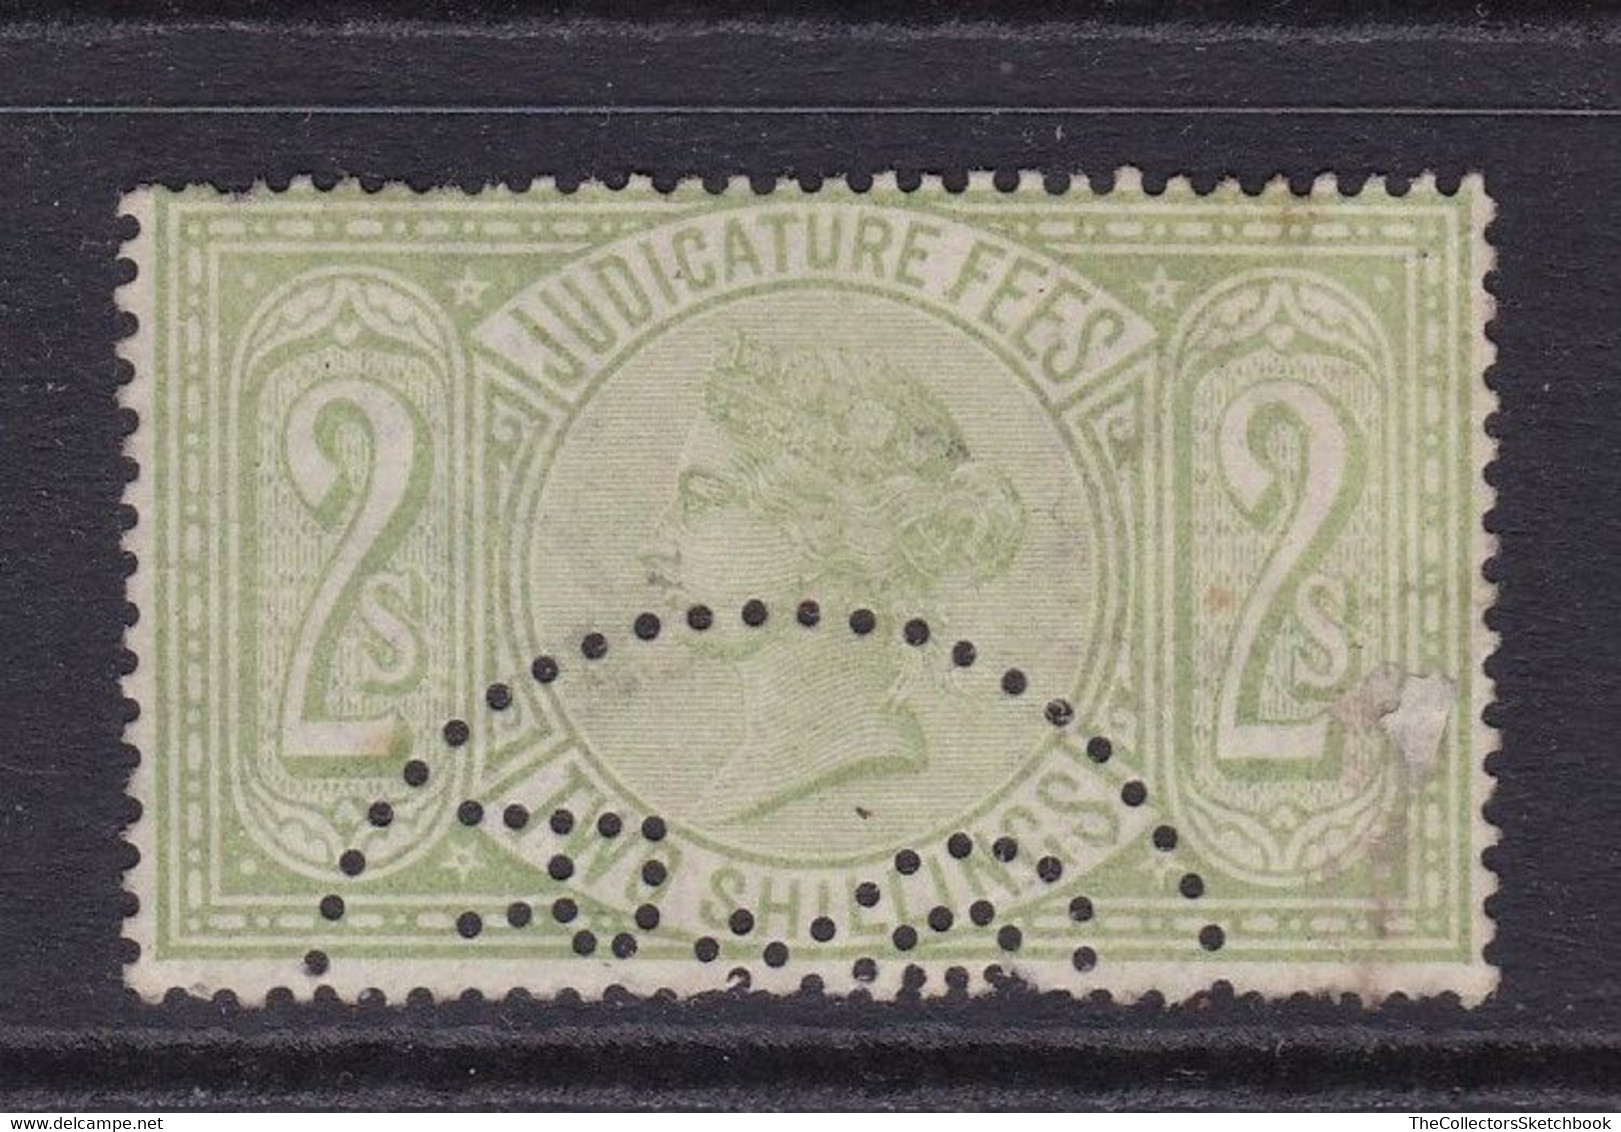 GB Fiscal/ Revenue Stamp.  Judicature Fees 2/- Green Fine Used. Barefoot 35 - Steuermarken